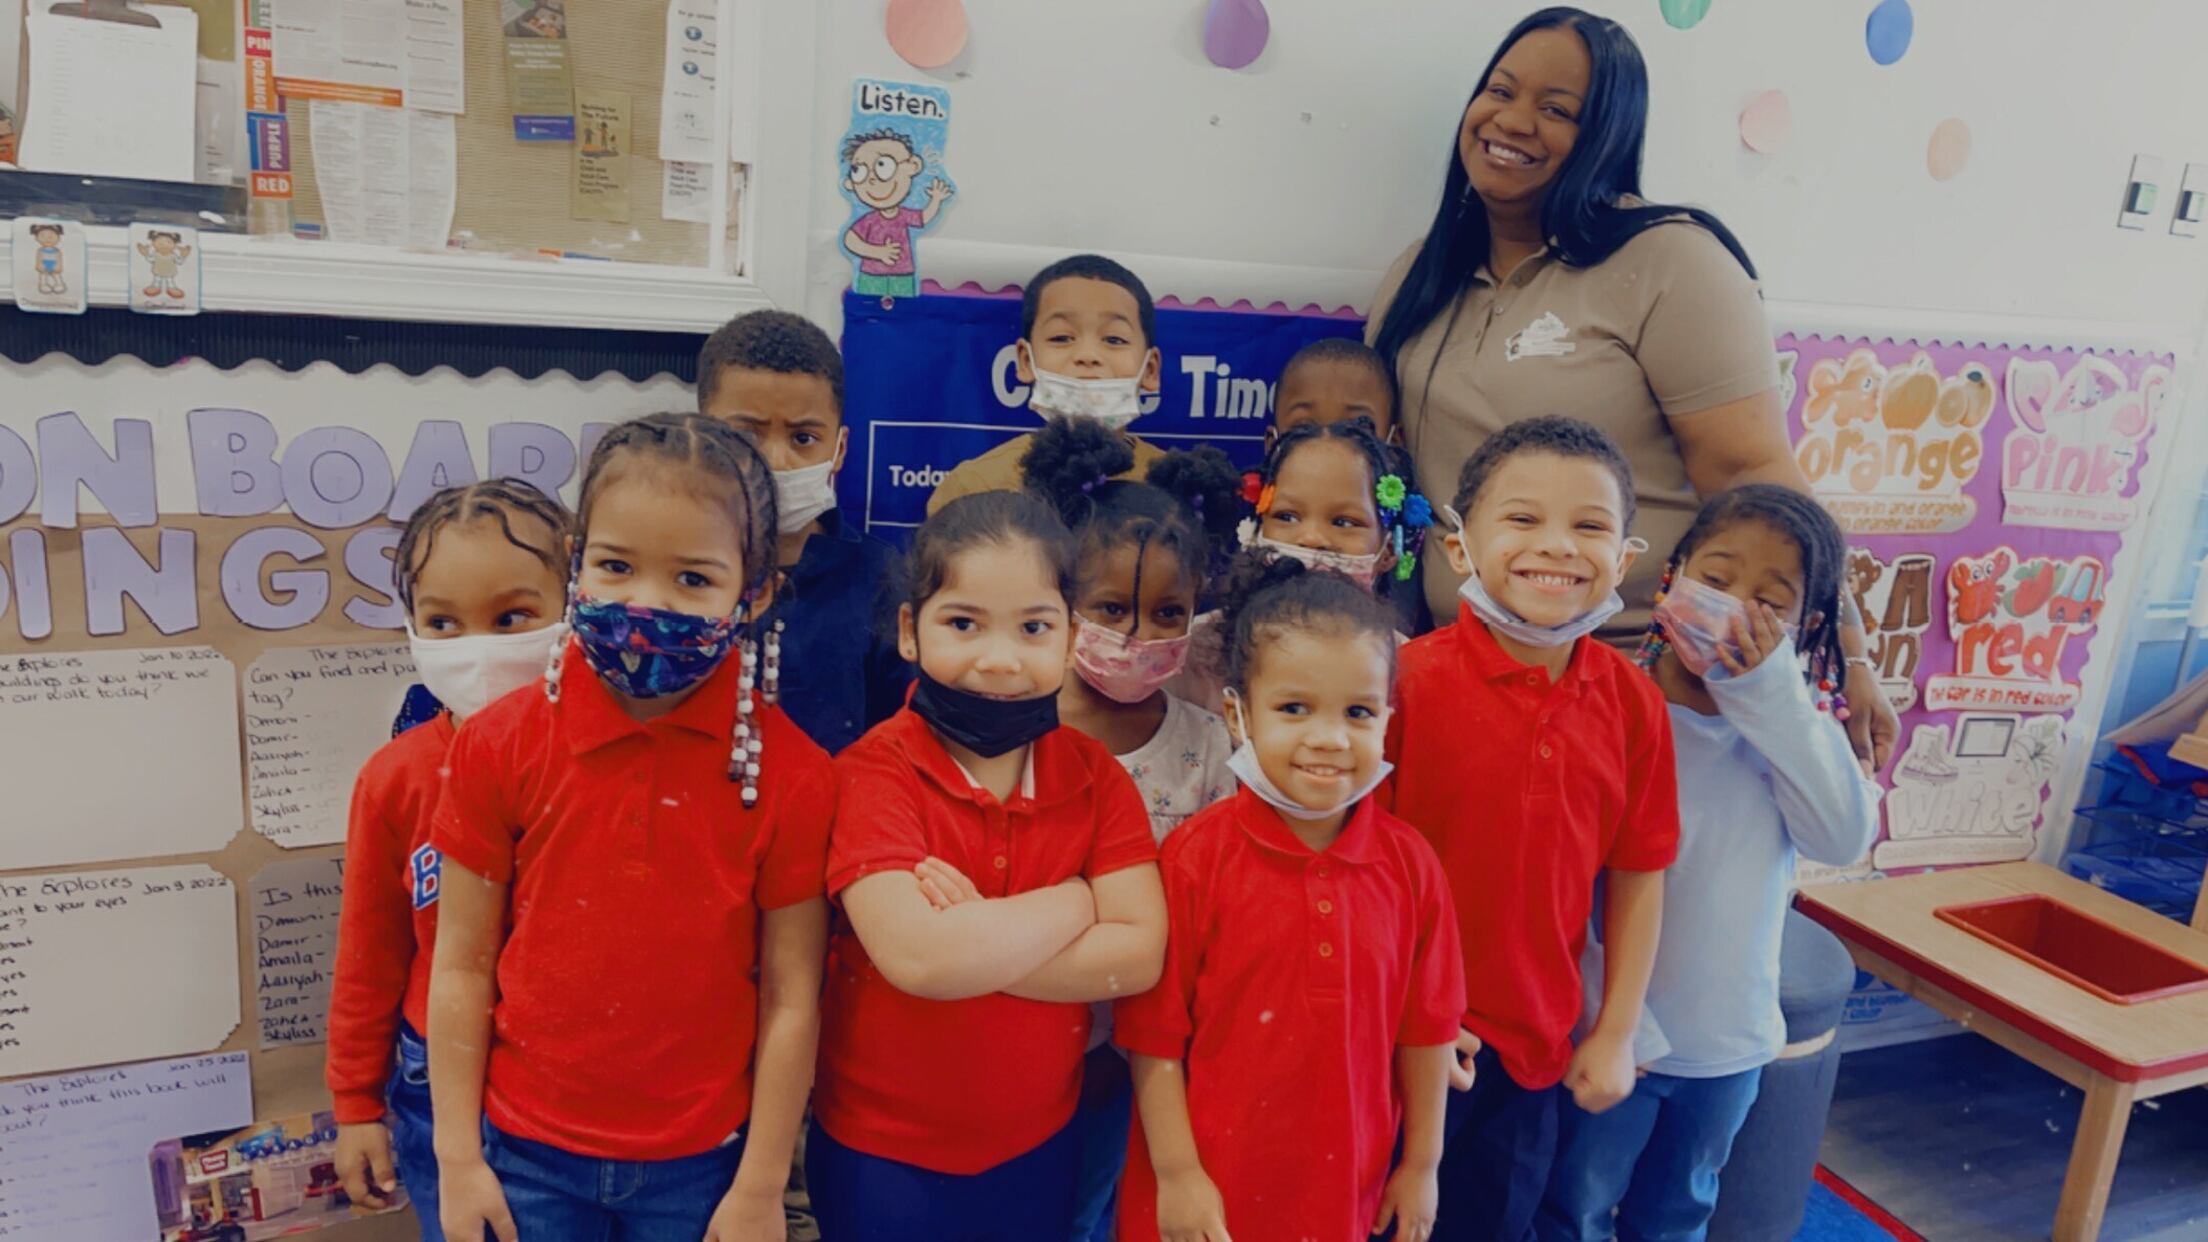 A preschool director in a brown shirt stands behind a group of children wearing red shirts.